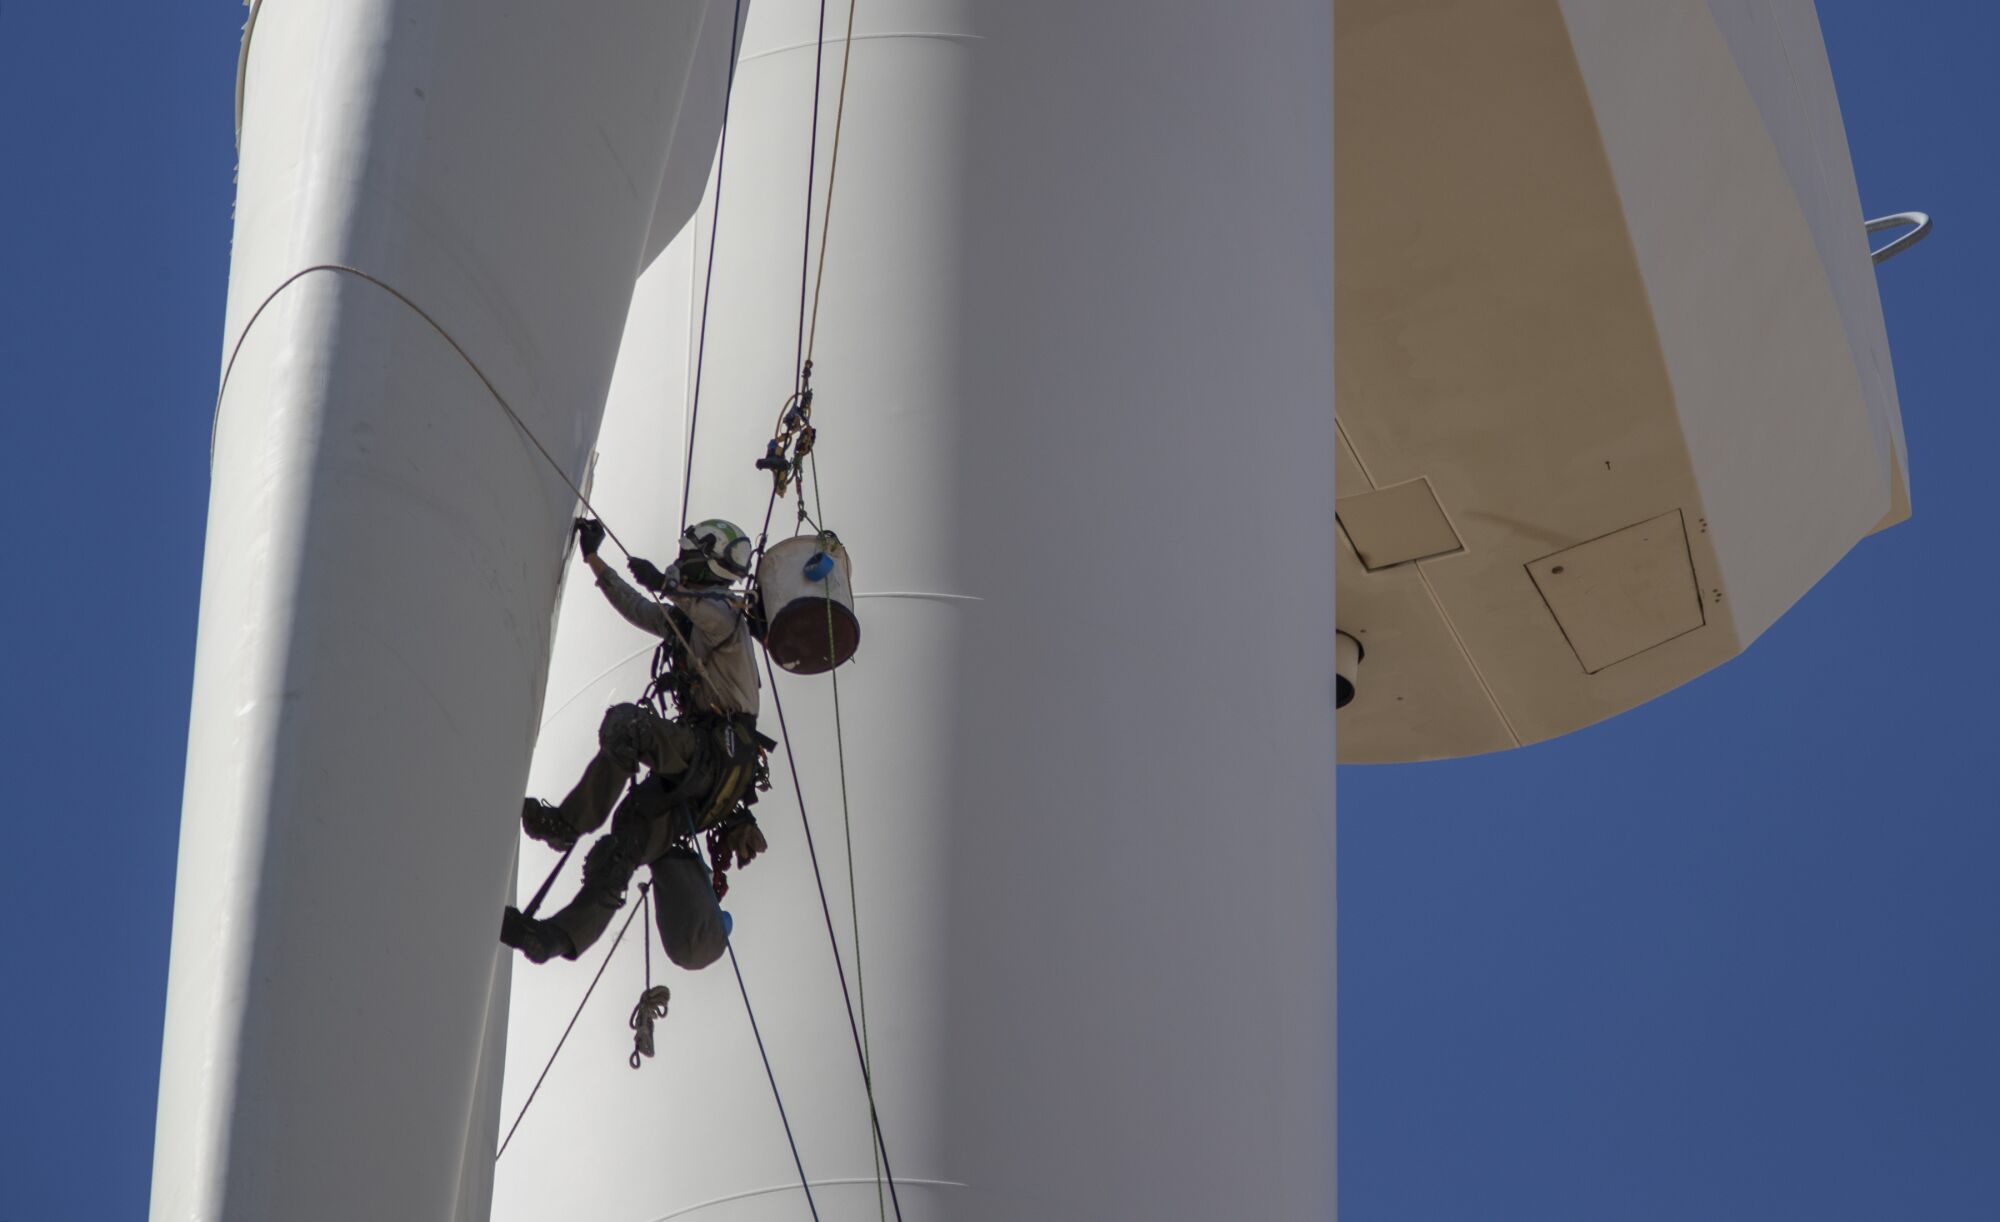 A person hangs from a winde turbine.